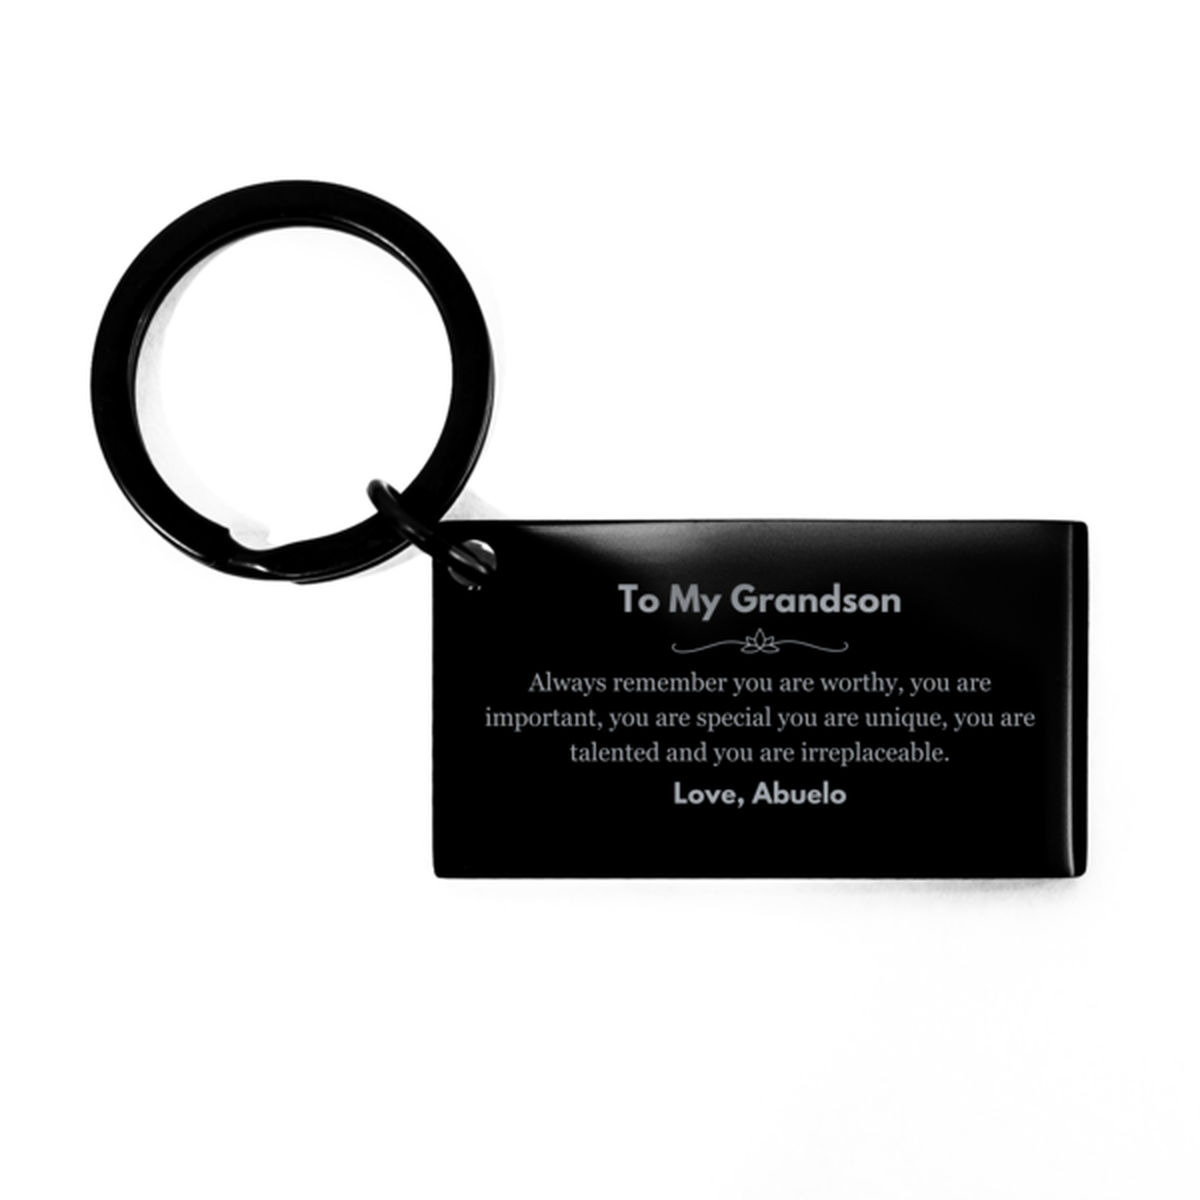 Grandson Birthday Gifts from Abuelo, Inspirational Keychain for Grandson Christmas Graduation Gifts for Grandson Always remember you are worthy, you are important. Love, Abuelo